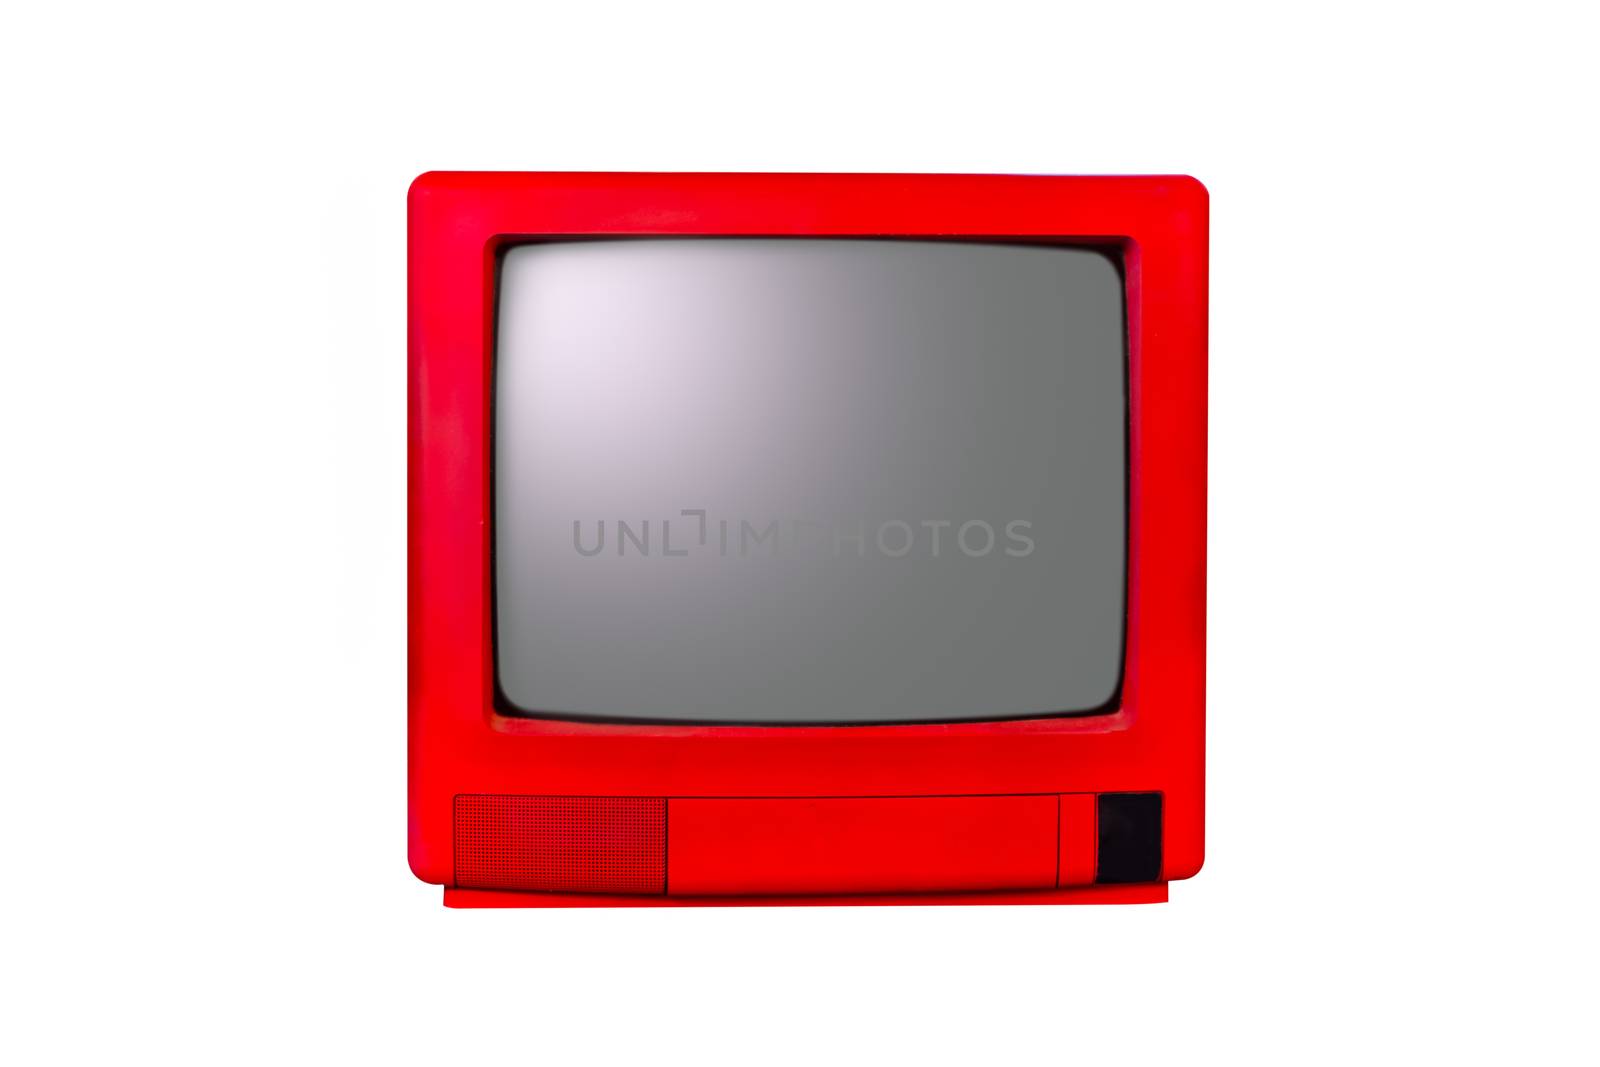 Retro old red television from 80s isolated on white background.